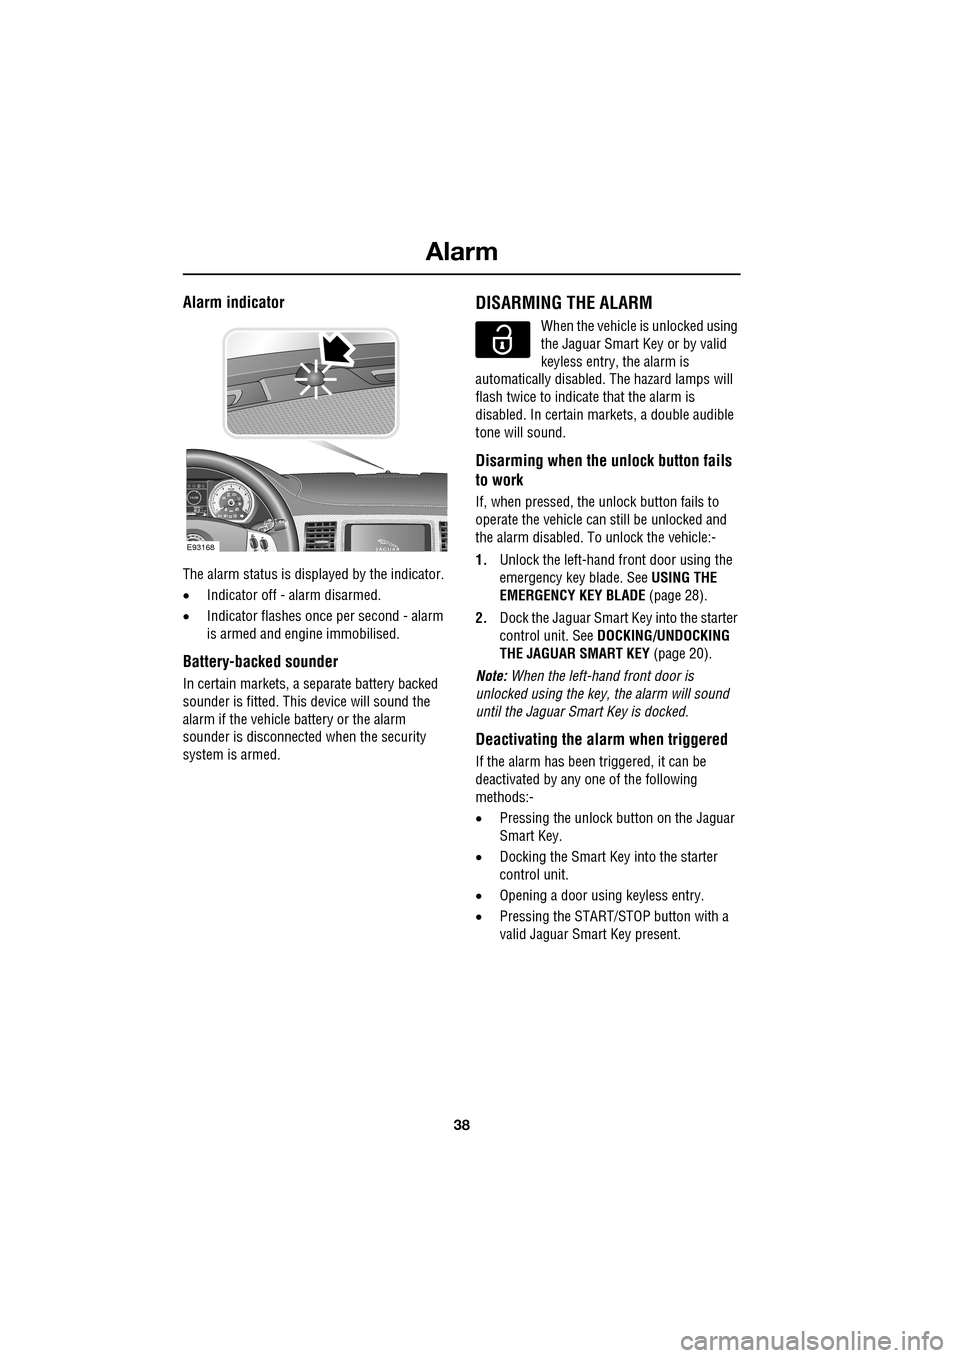 JAGUAR XF 2009 1.G User Guide Alarm
38
               
Alarm indicator
The alarm status is displayed by the indicator. 
•Indicator off - alarm disarmed.
• Indicator flashes onc e per second - alarm 
is armed and engine immobil